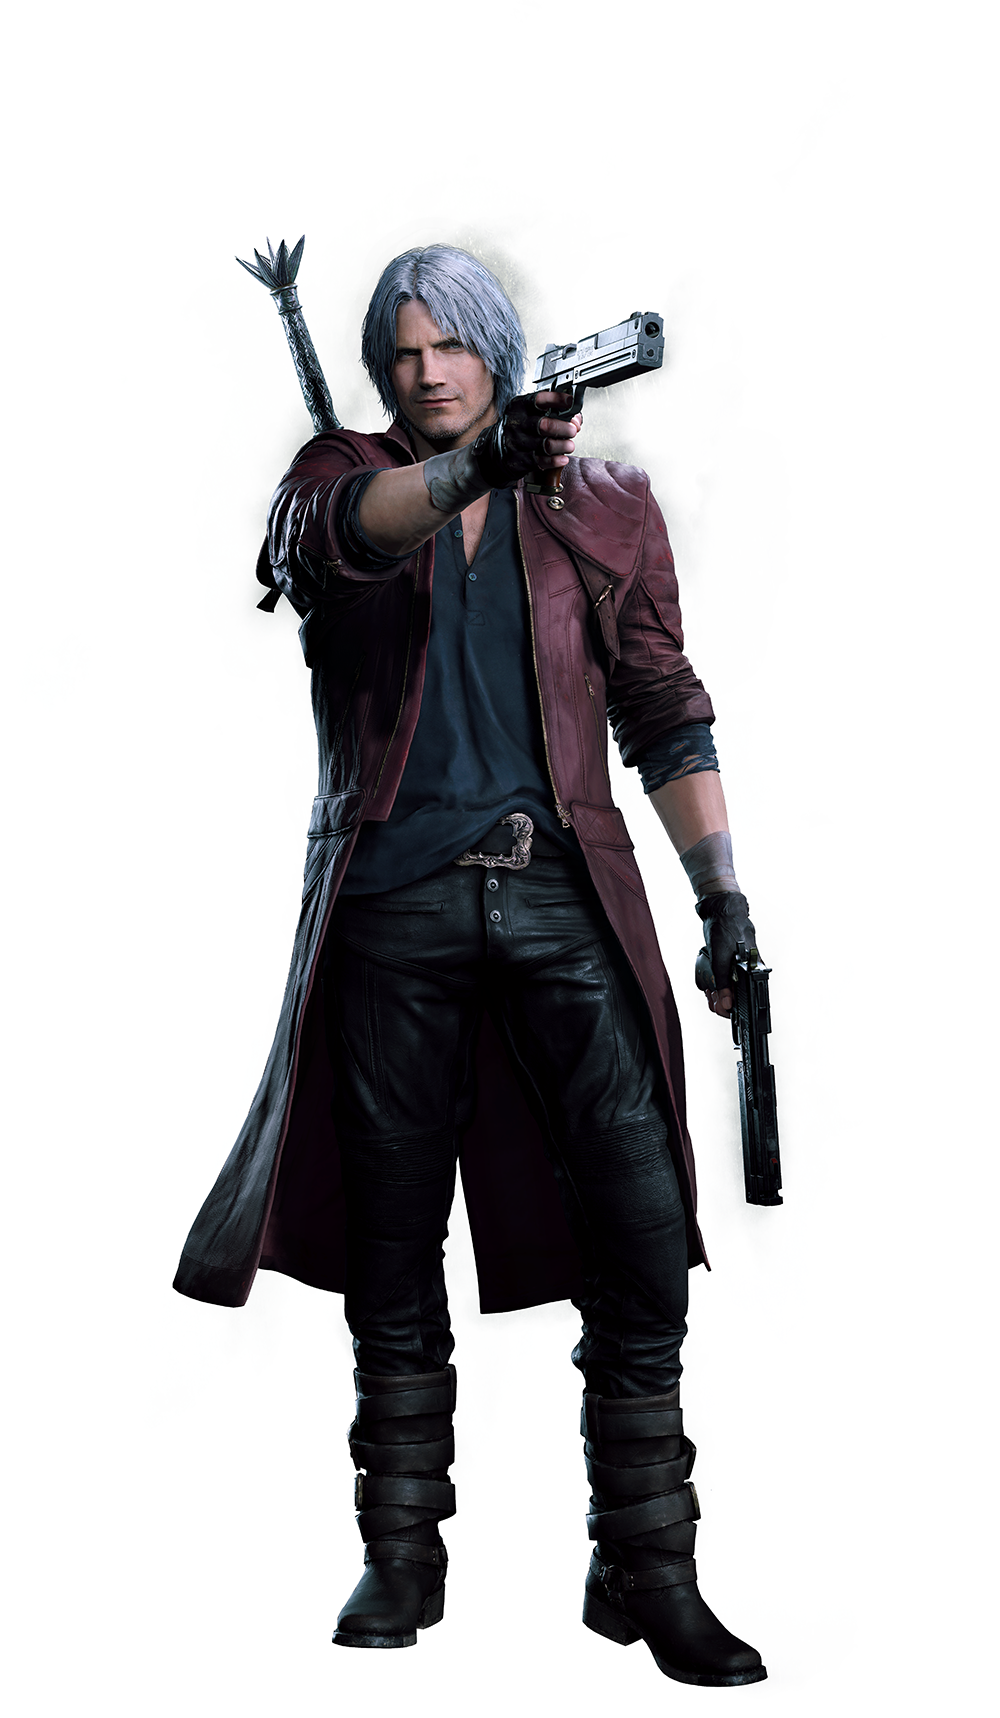 Devil May Cry 5 Dante Leather Coat